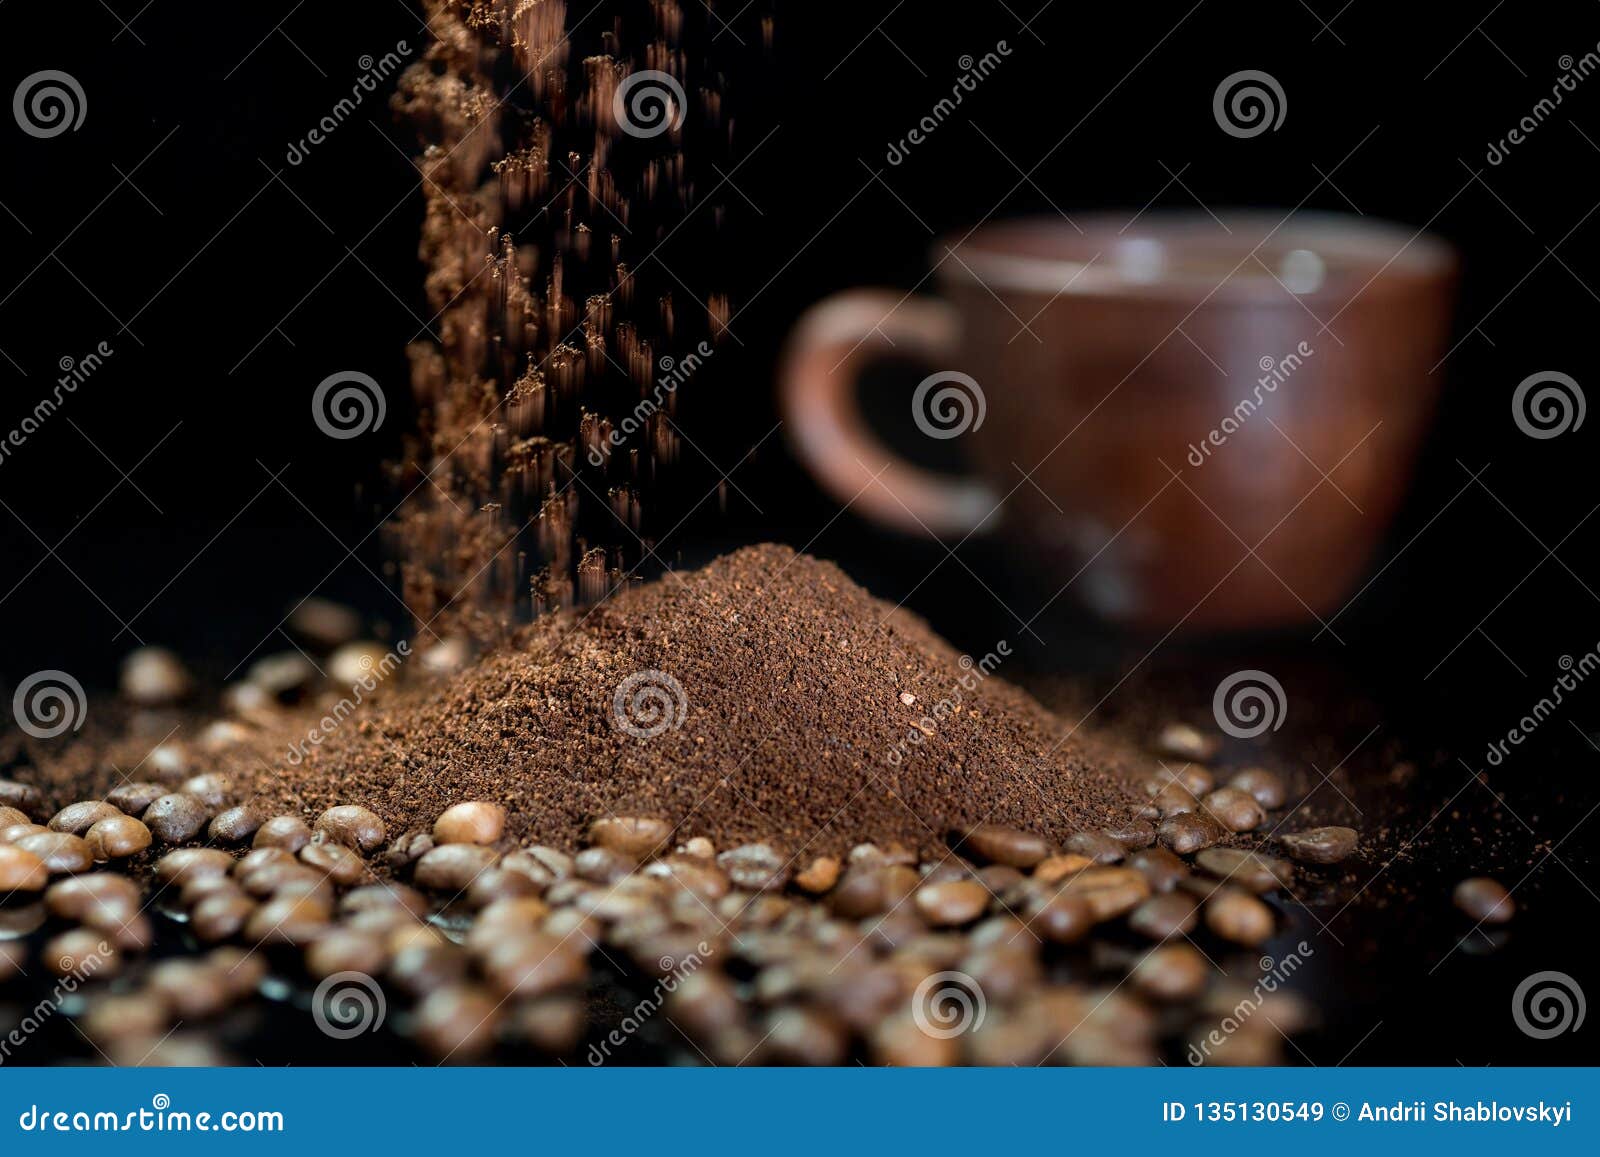 instant coffee against the background of coffee beans